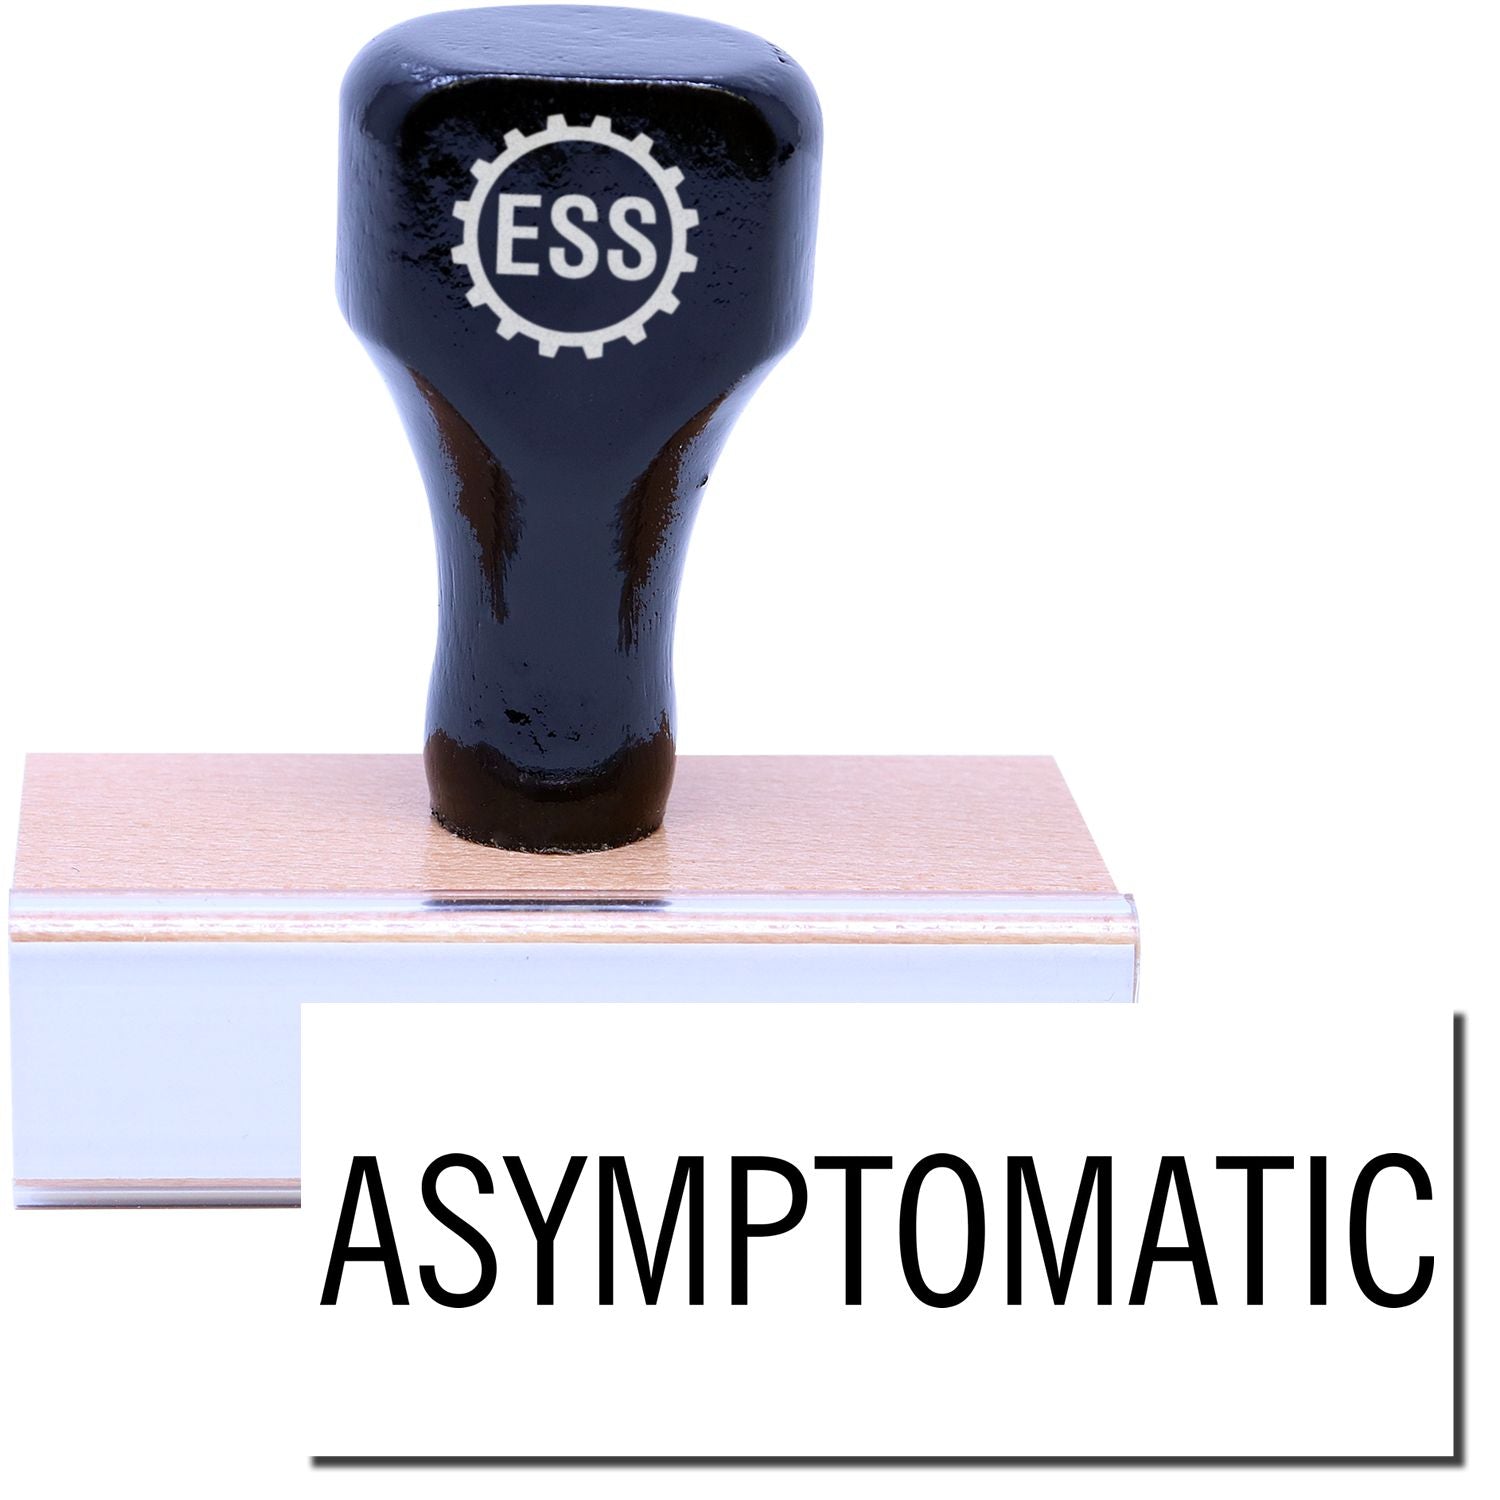 A stock office rubber stamp with a stamped image showing how the text "ASYMPTOMATIC" is displayed after stamping.